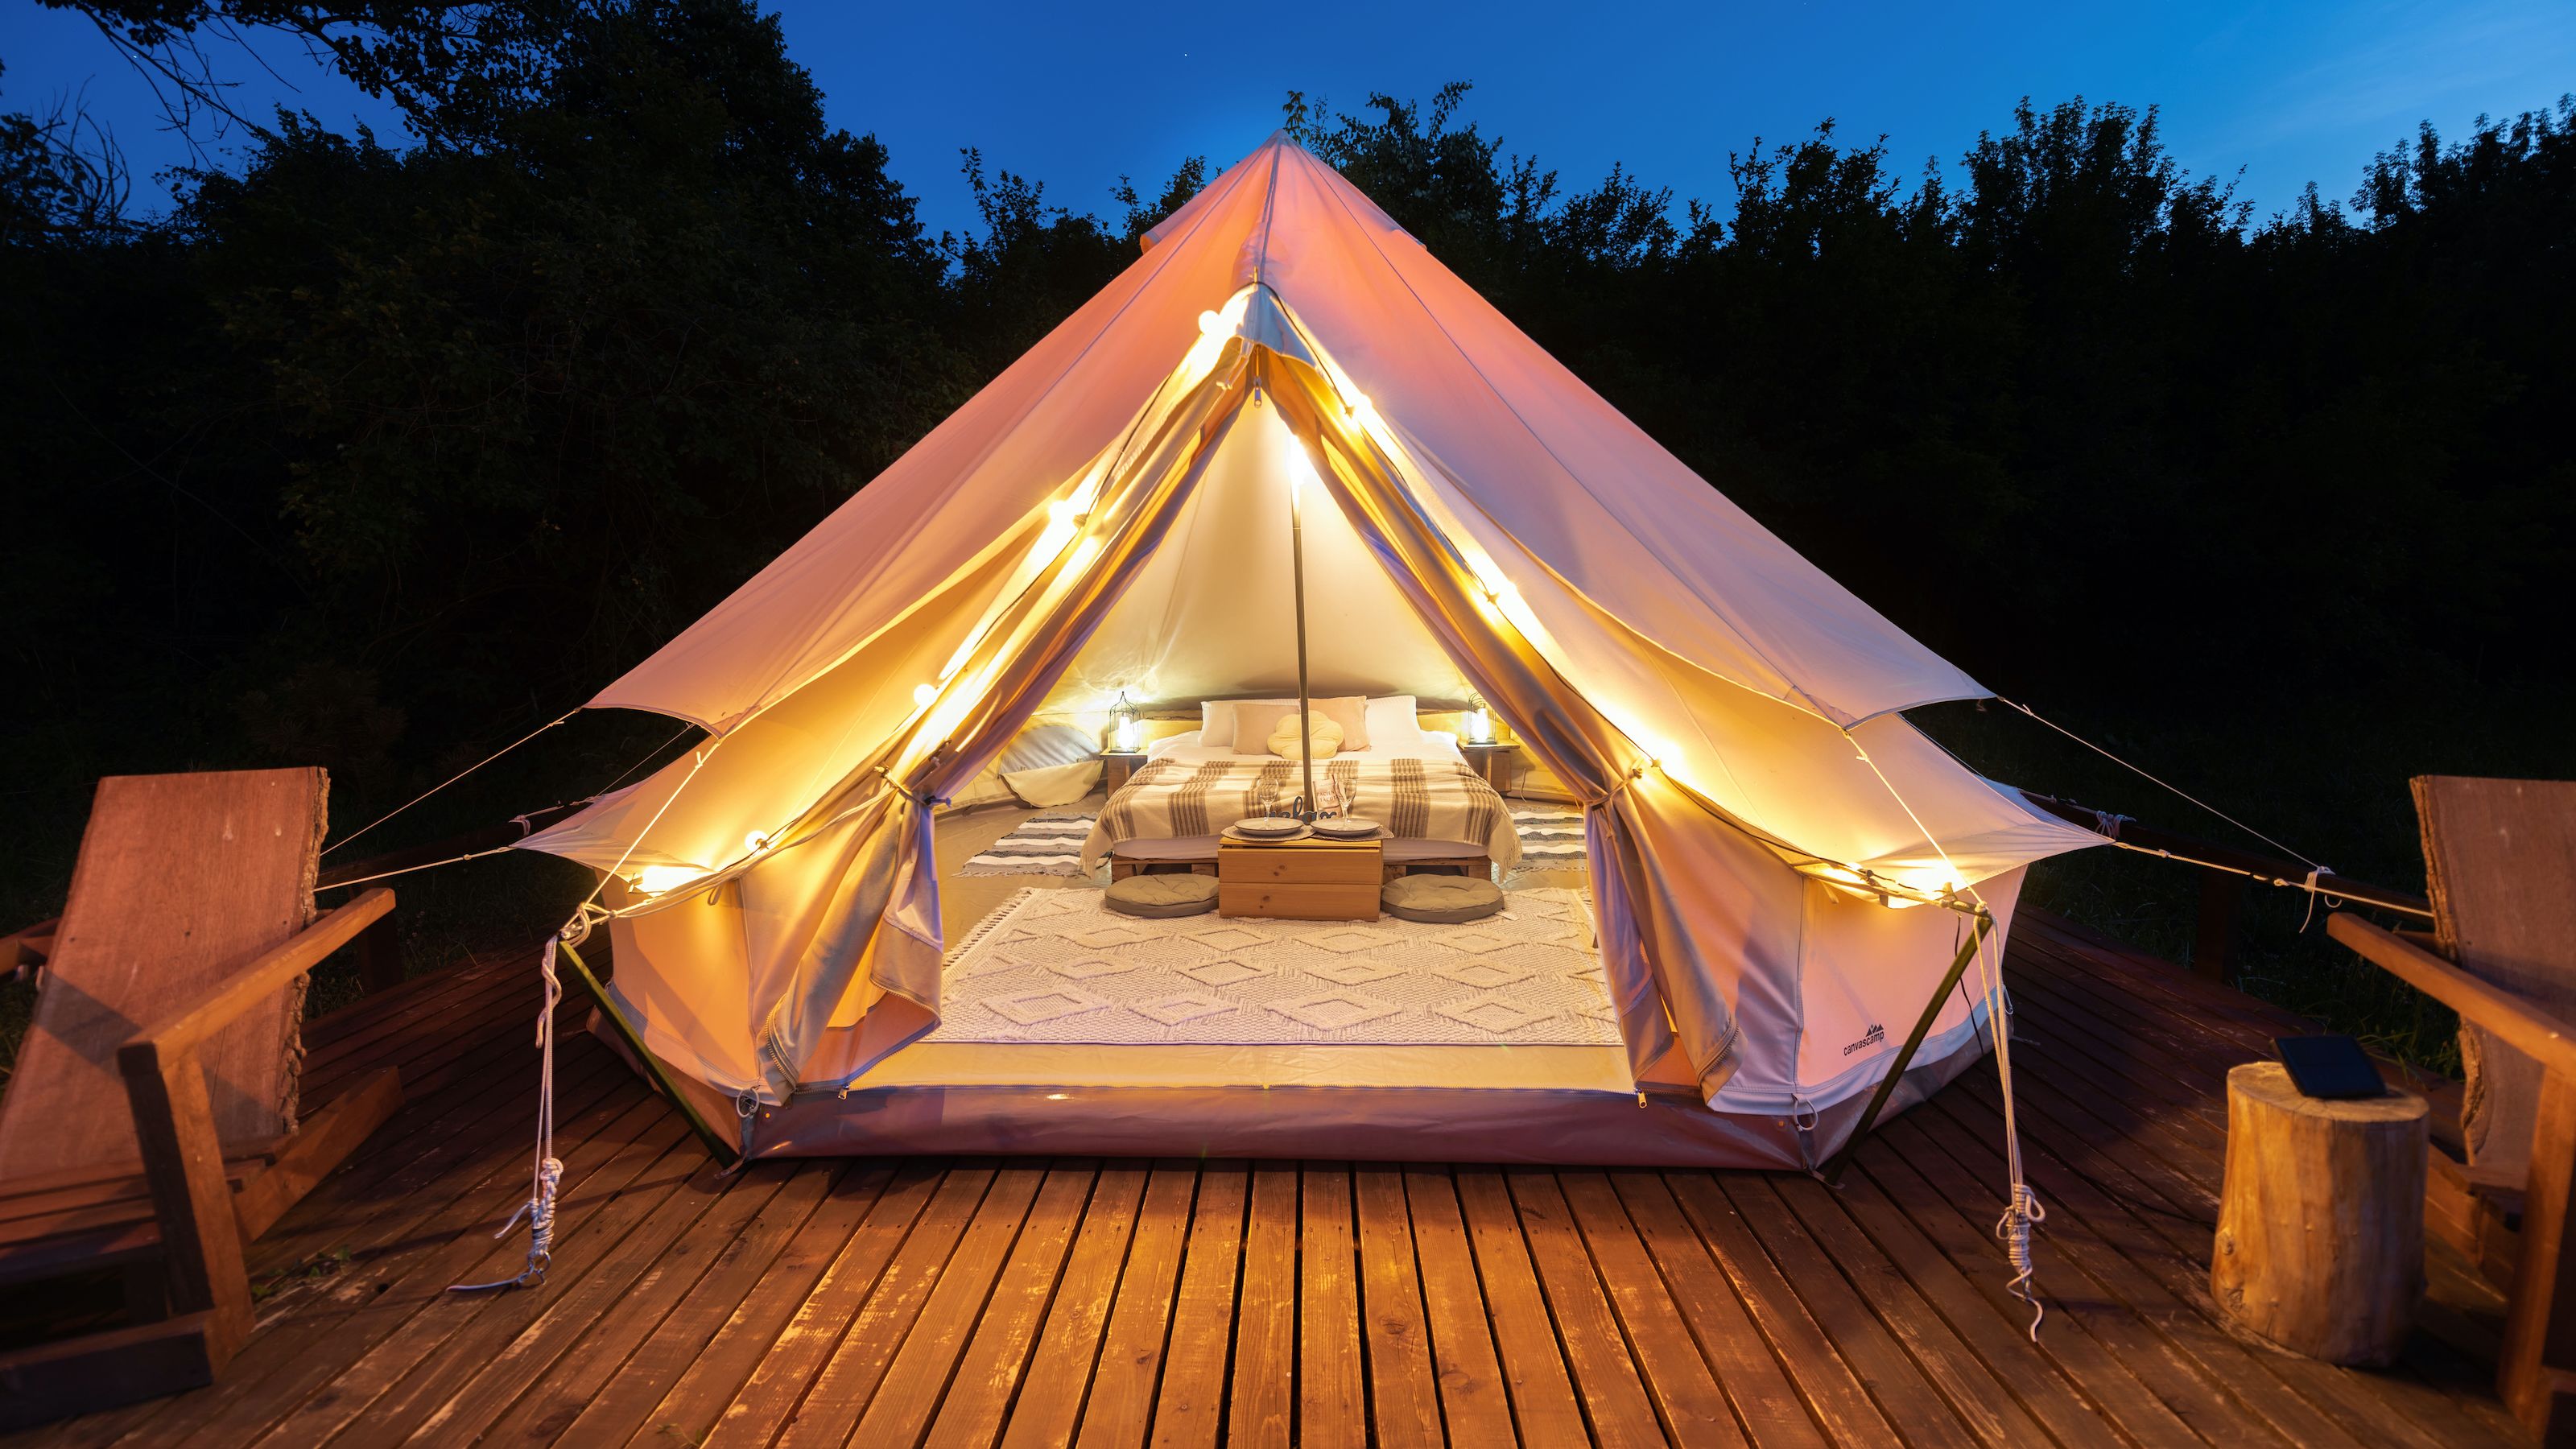 These 10 camping gadgets and accessories will help you unwind and